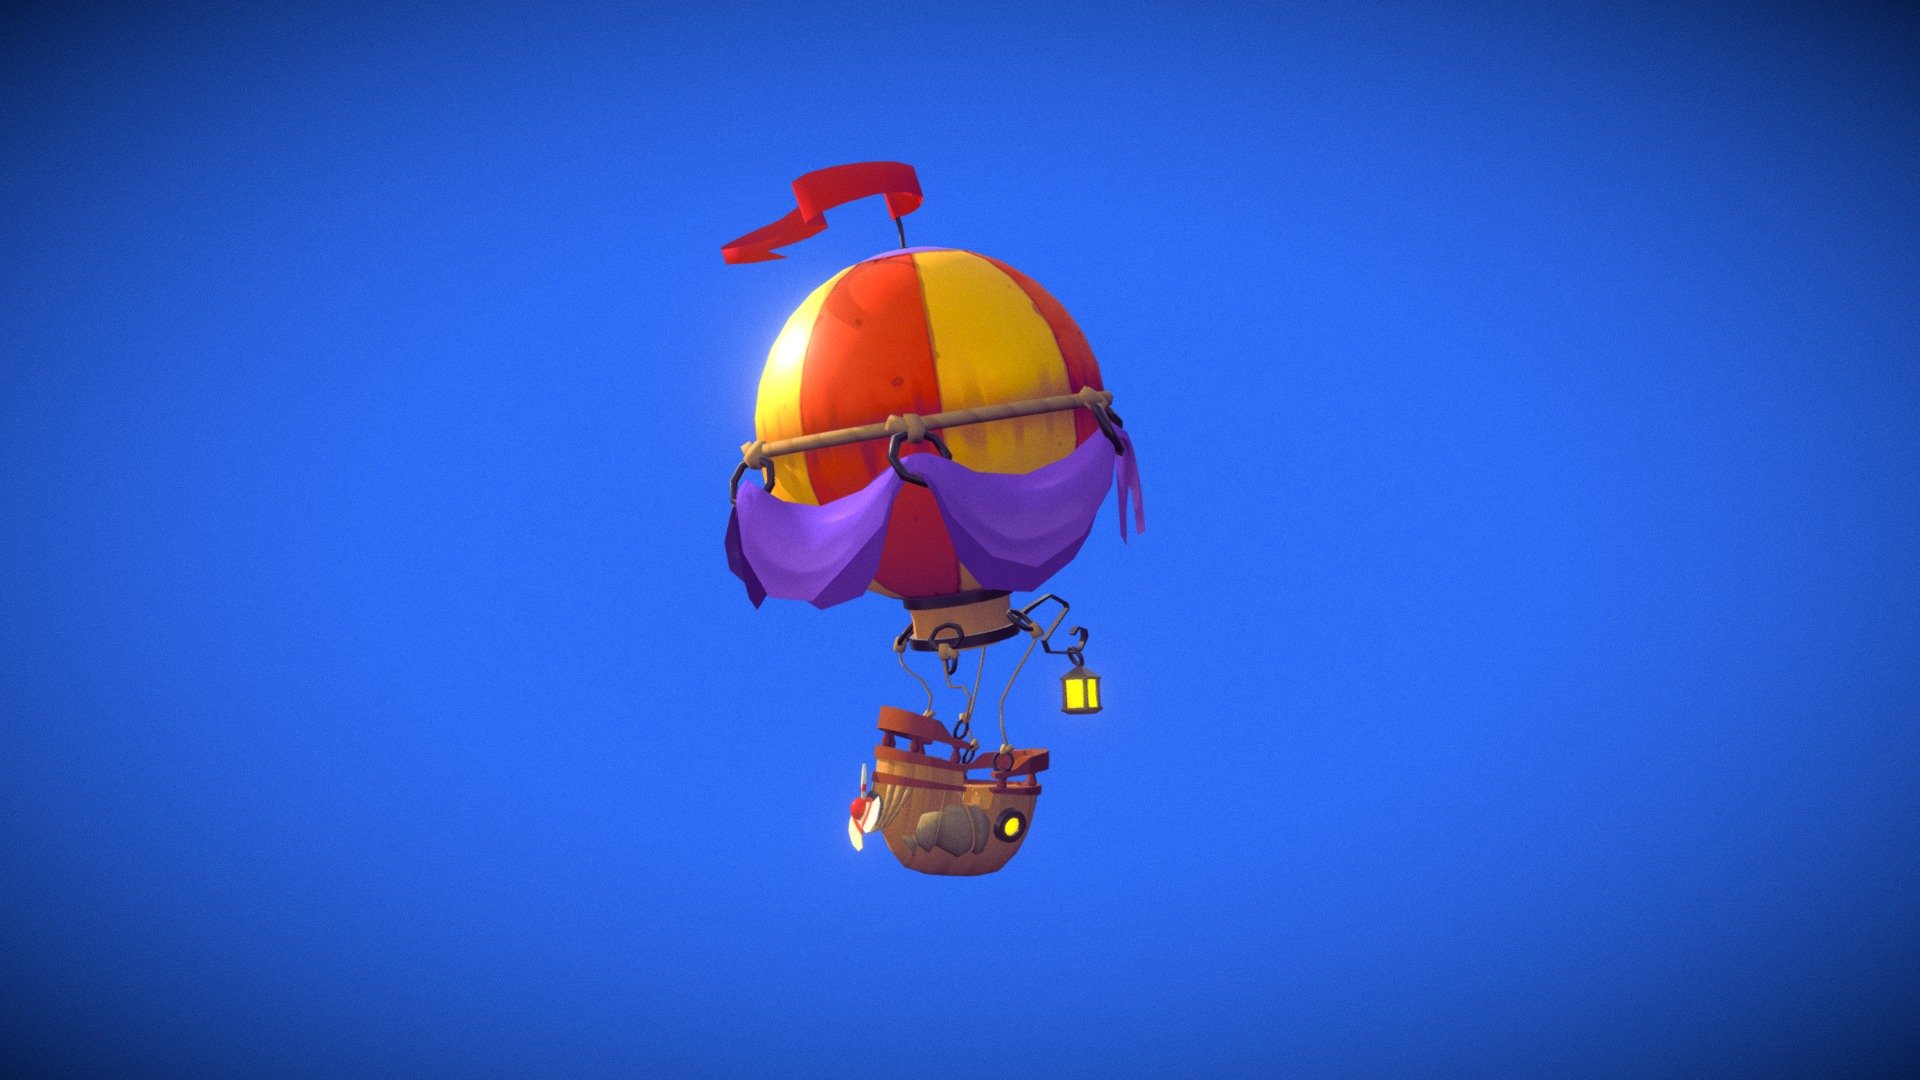 Low poly practice with a hot air ballon. Used my own concept art for reference 3d model